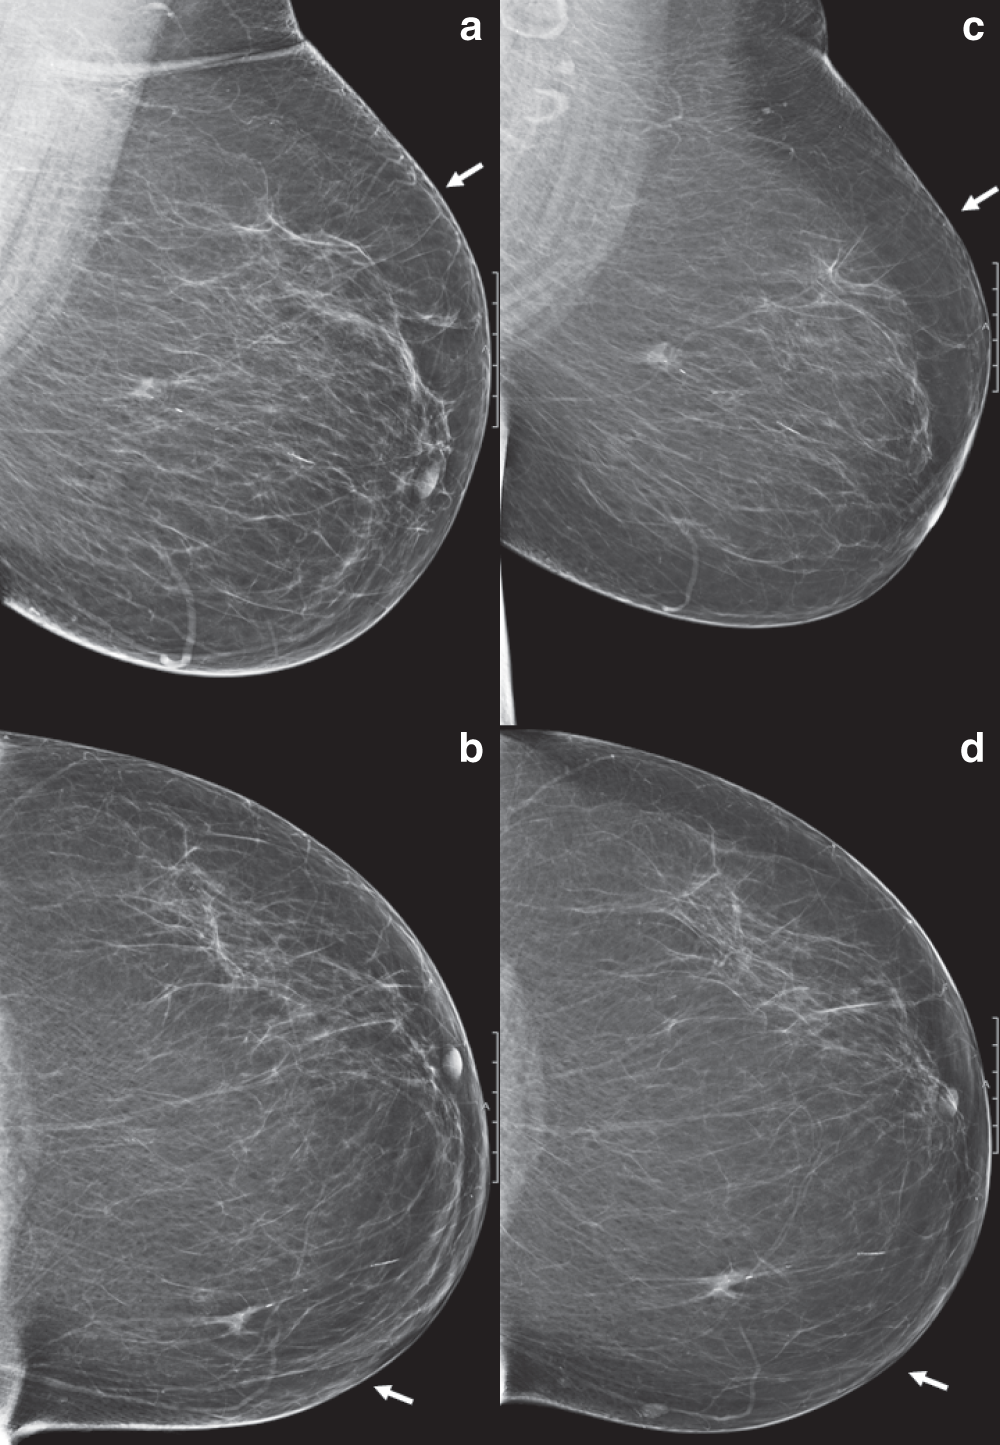 Delayed breast cancer diagnosis after repeated recall at biennial screening  mammography: an observational follow-up study from the Netherlands |  British Journal of Cancer